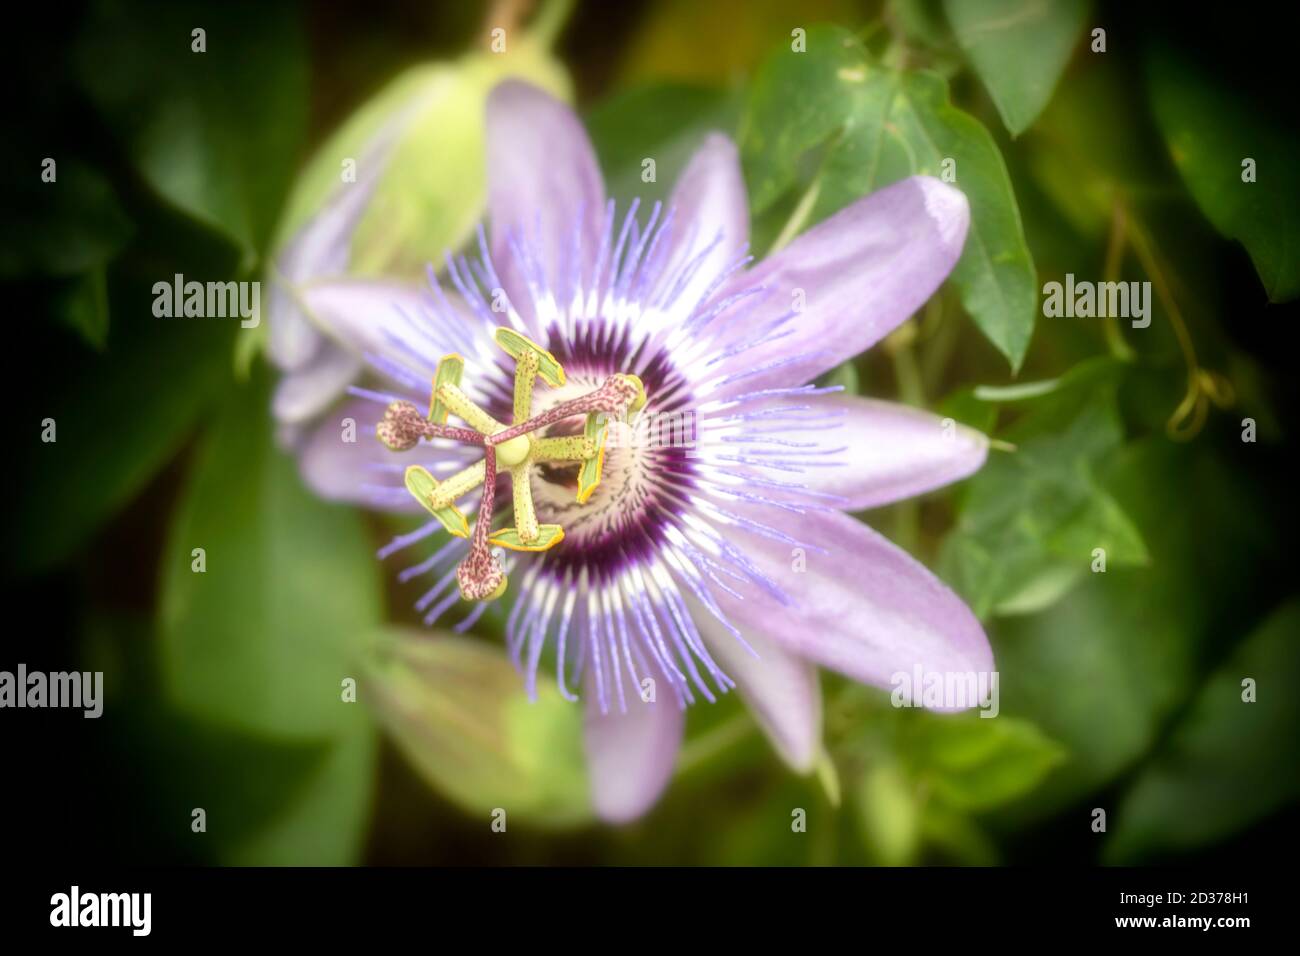 Passion flower and foliage as natural flower portrait Stock Photo